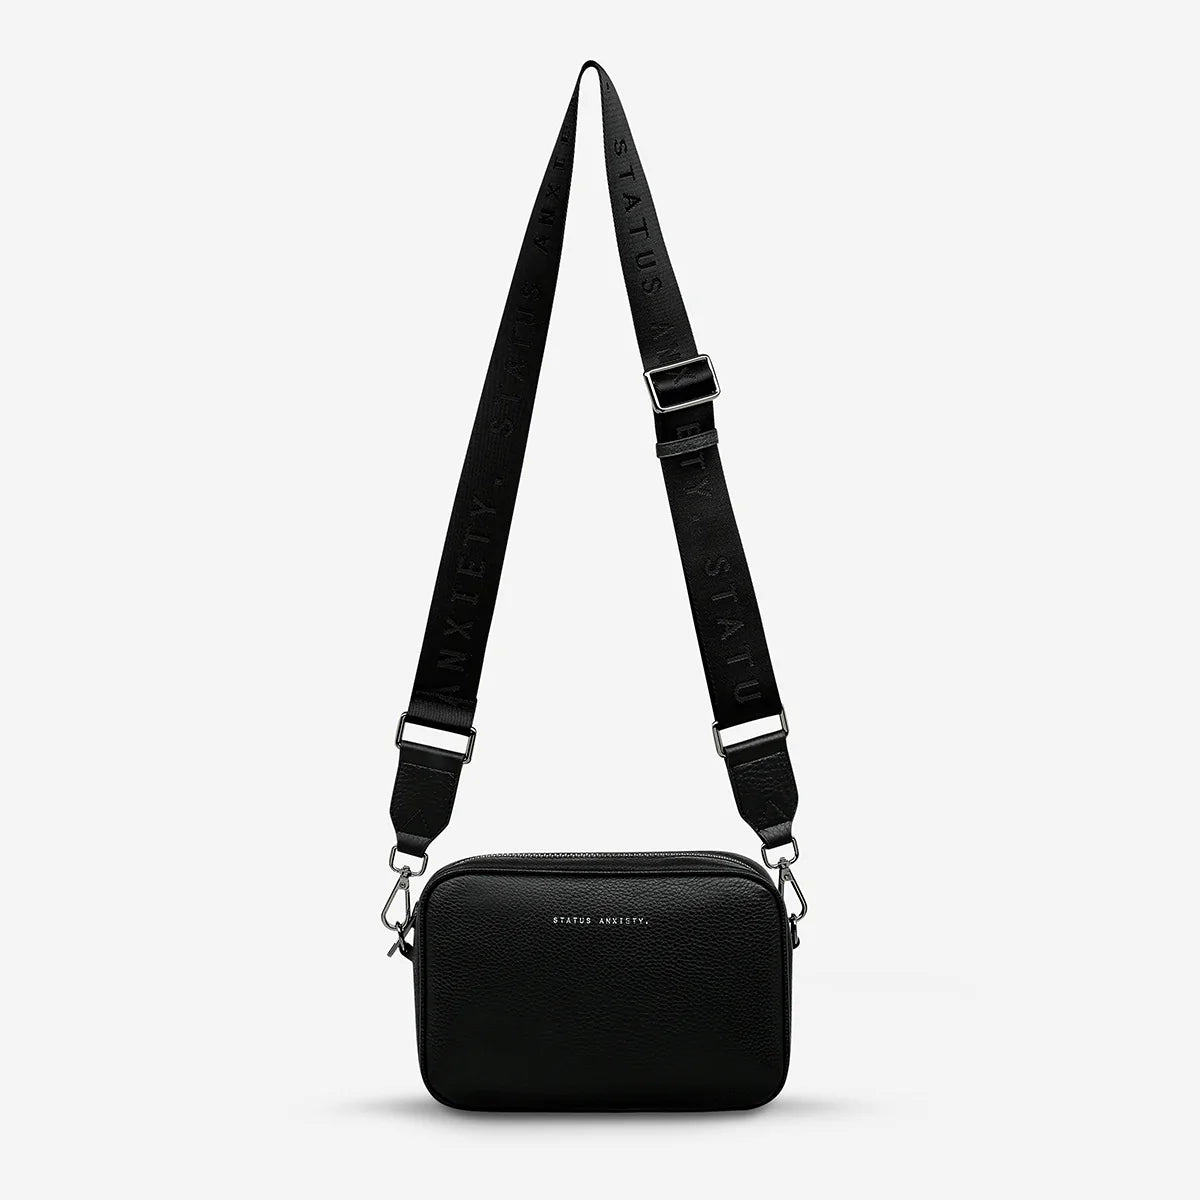 STATUS ANXIETY // Plunder With Webbed Strap Bag BLACK